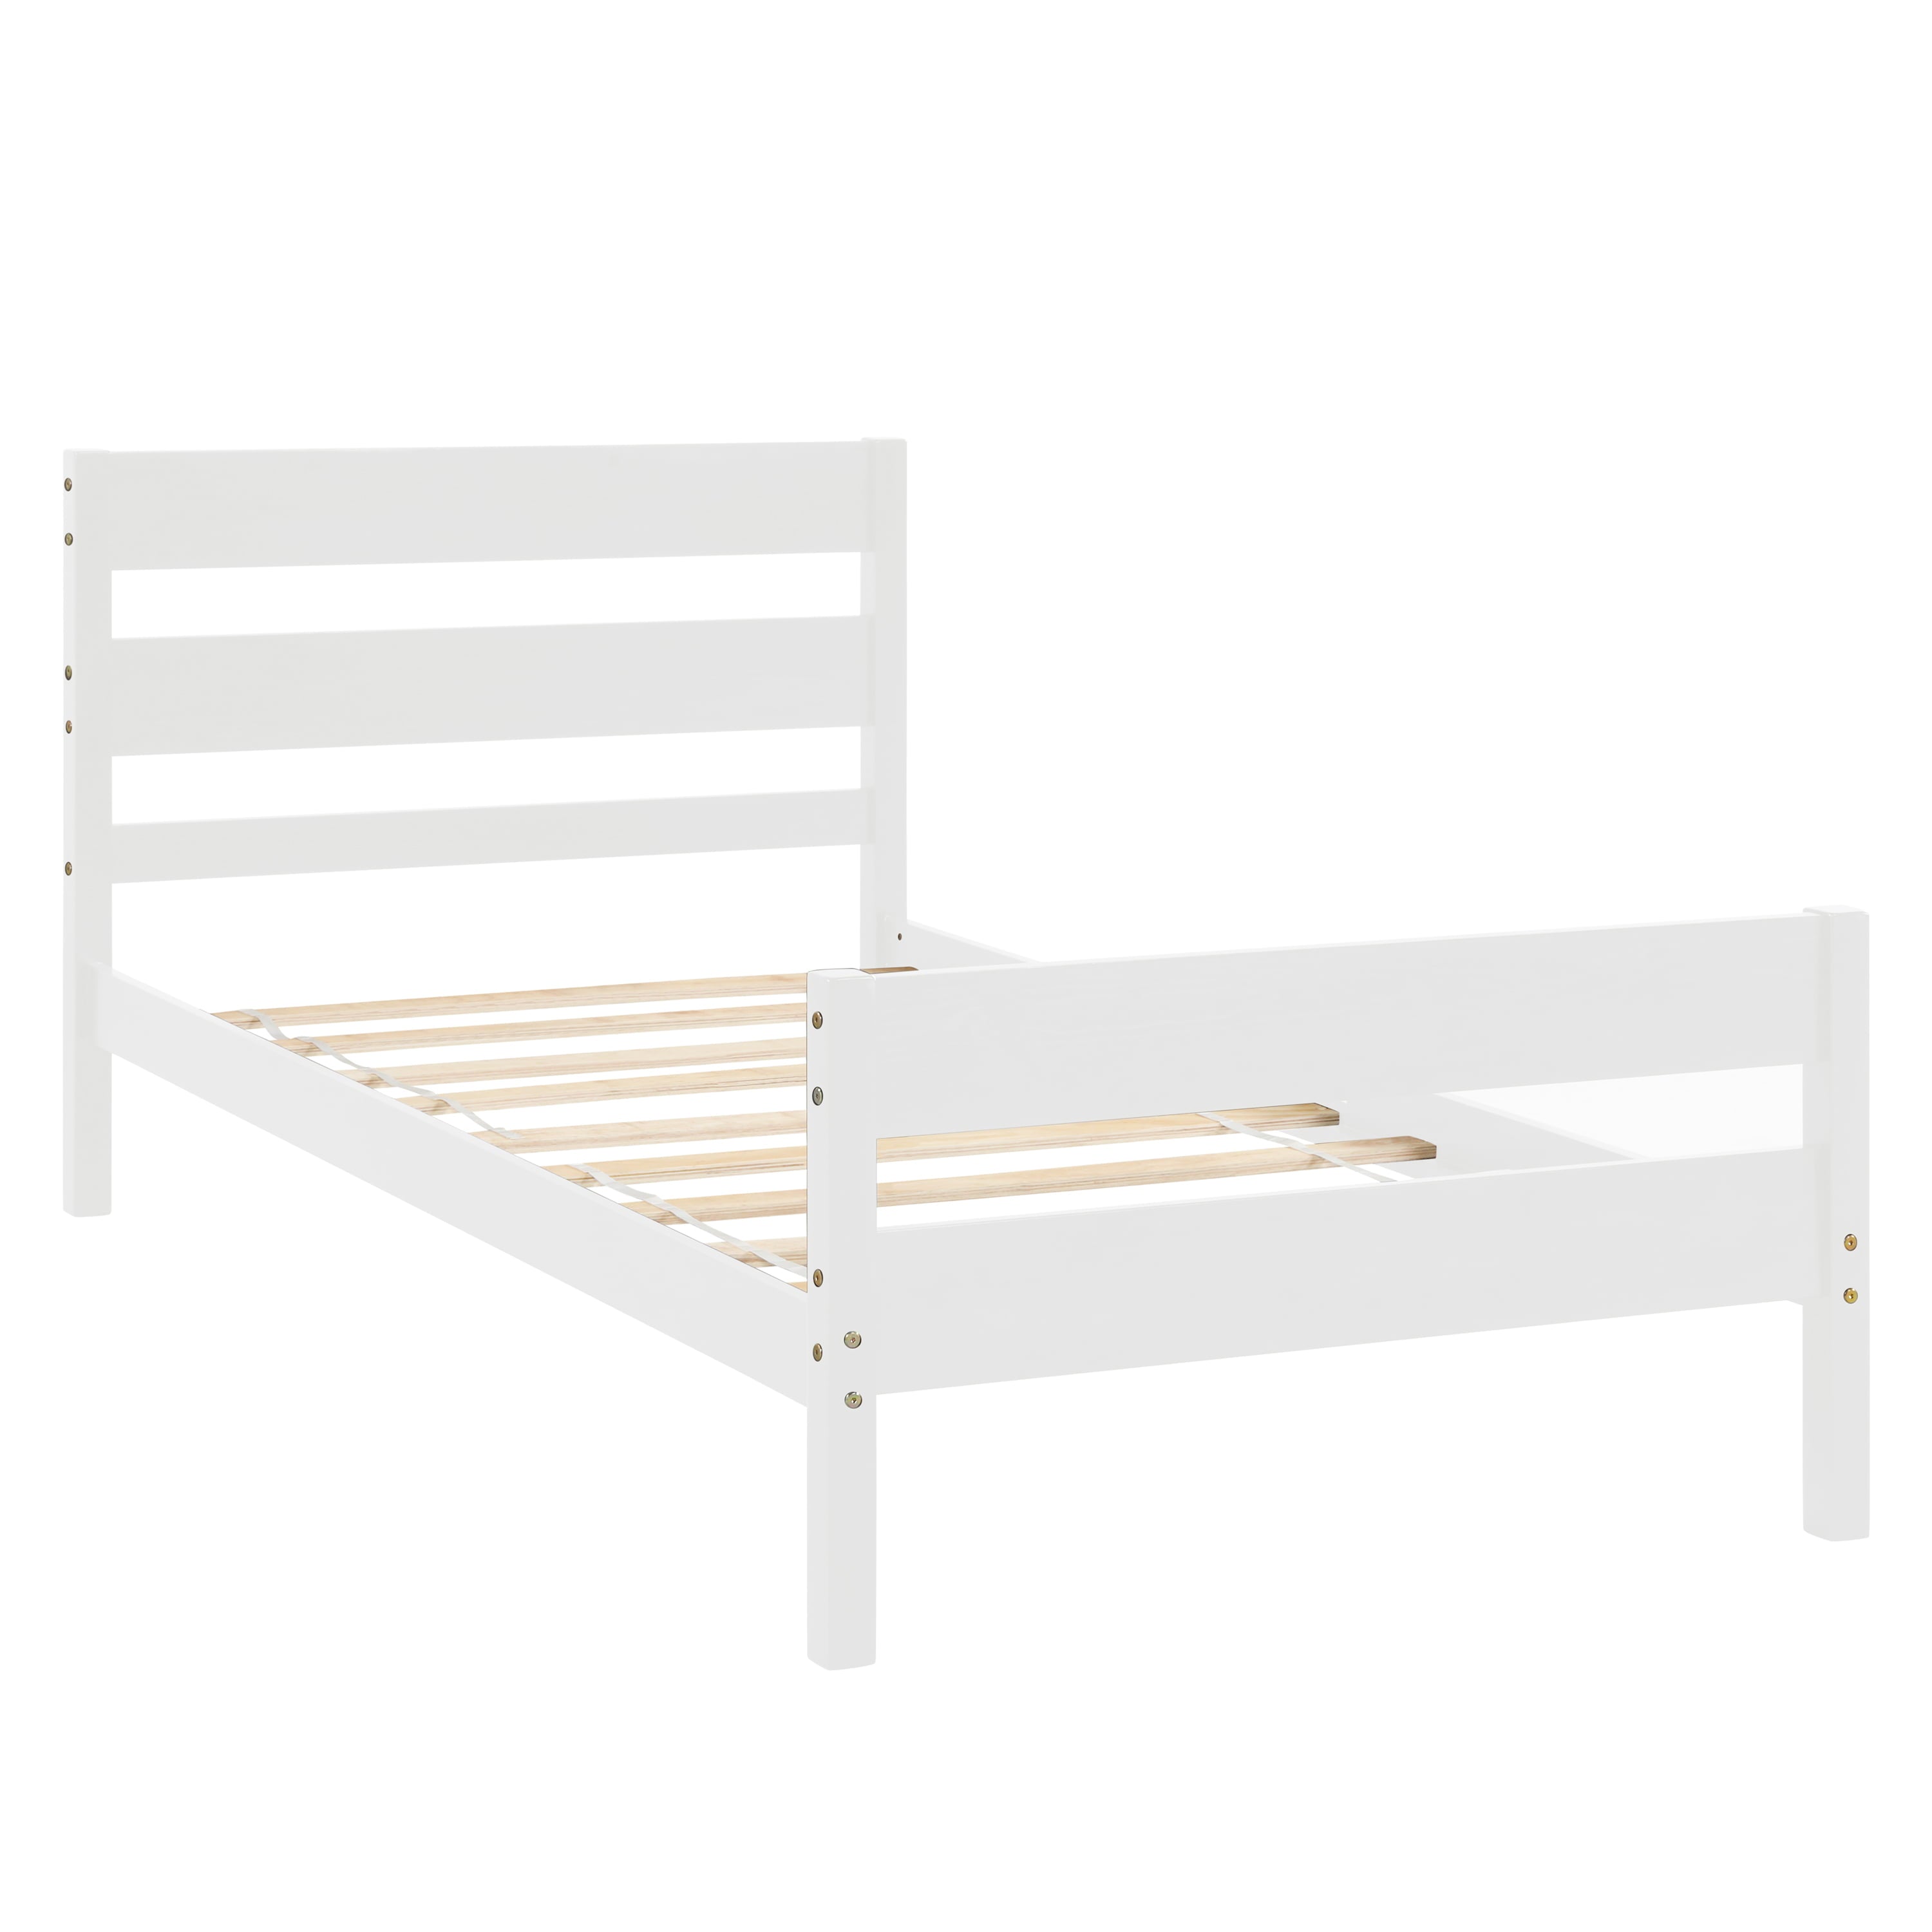 uhomepro Twin Bed Frame No Box Spring Needed, Wood Platform Bed Frame with Headboard and Footboard, Strong Wooden Slats, Twin Bed Frames for Kids, Adults, Modern Bedroom Furniture, White